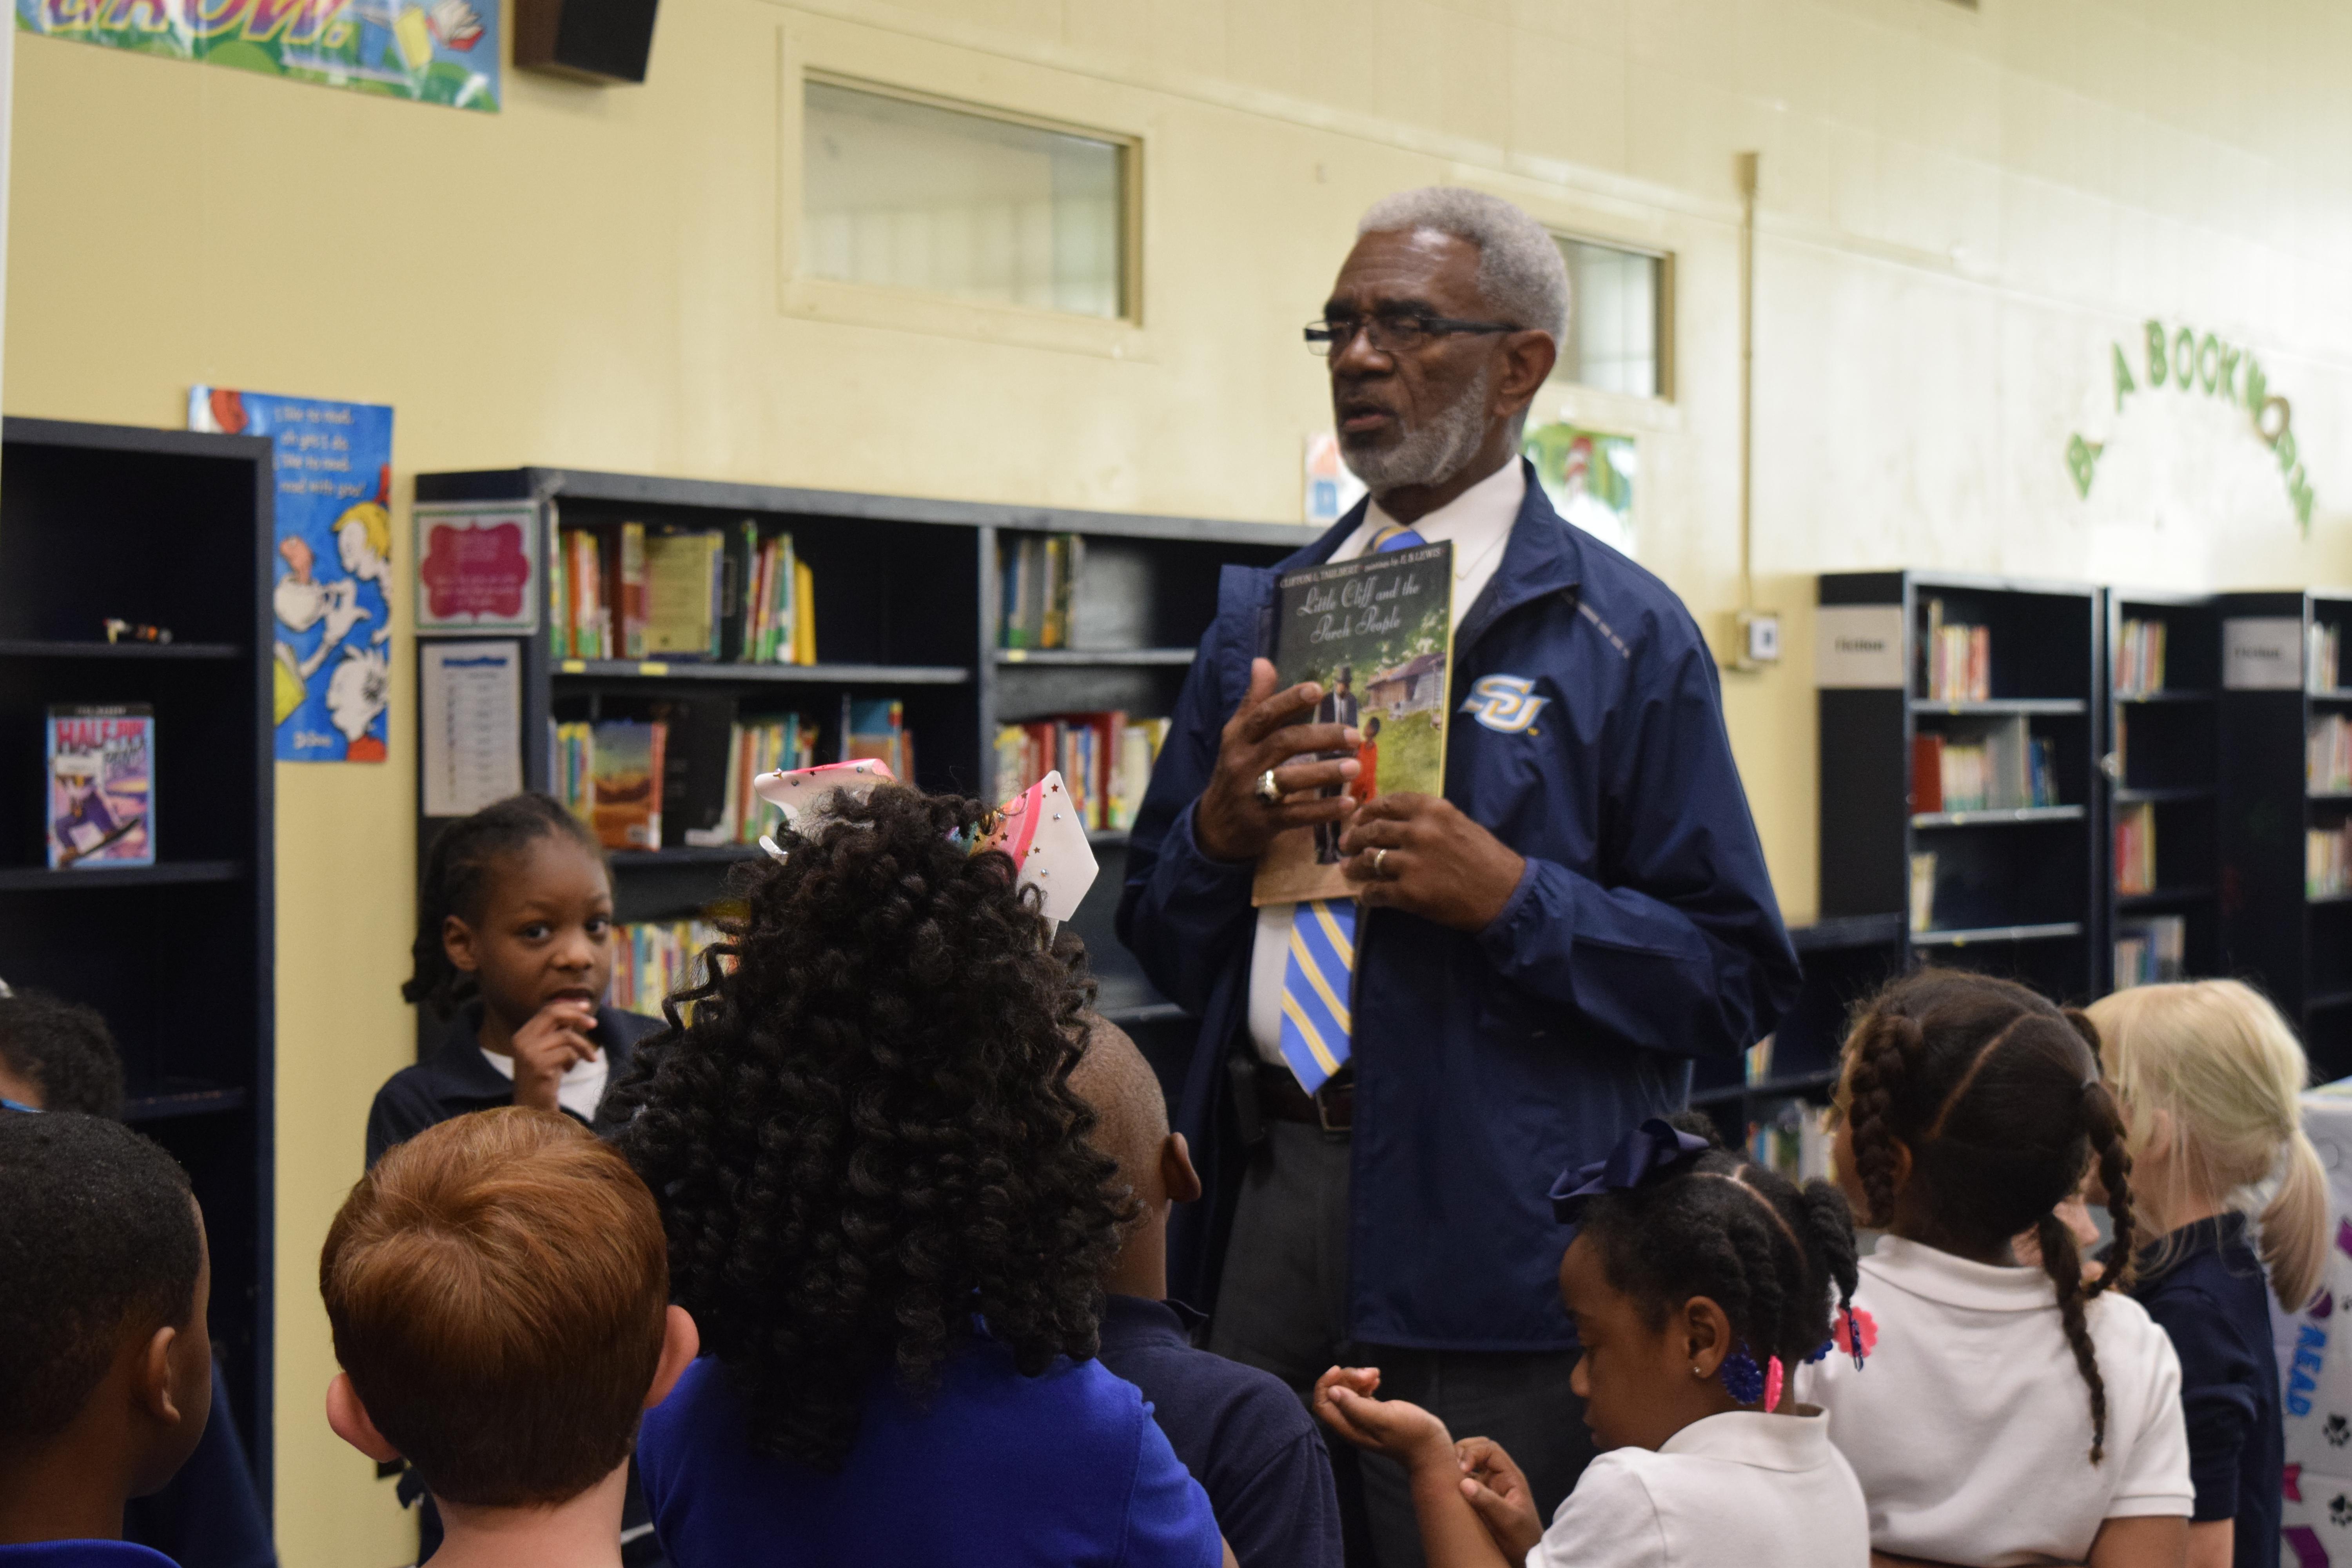 NASD Board member and Superintendent Give Students a Book